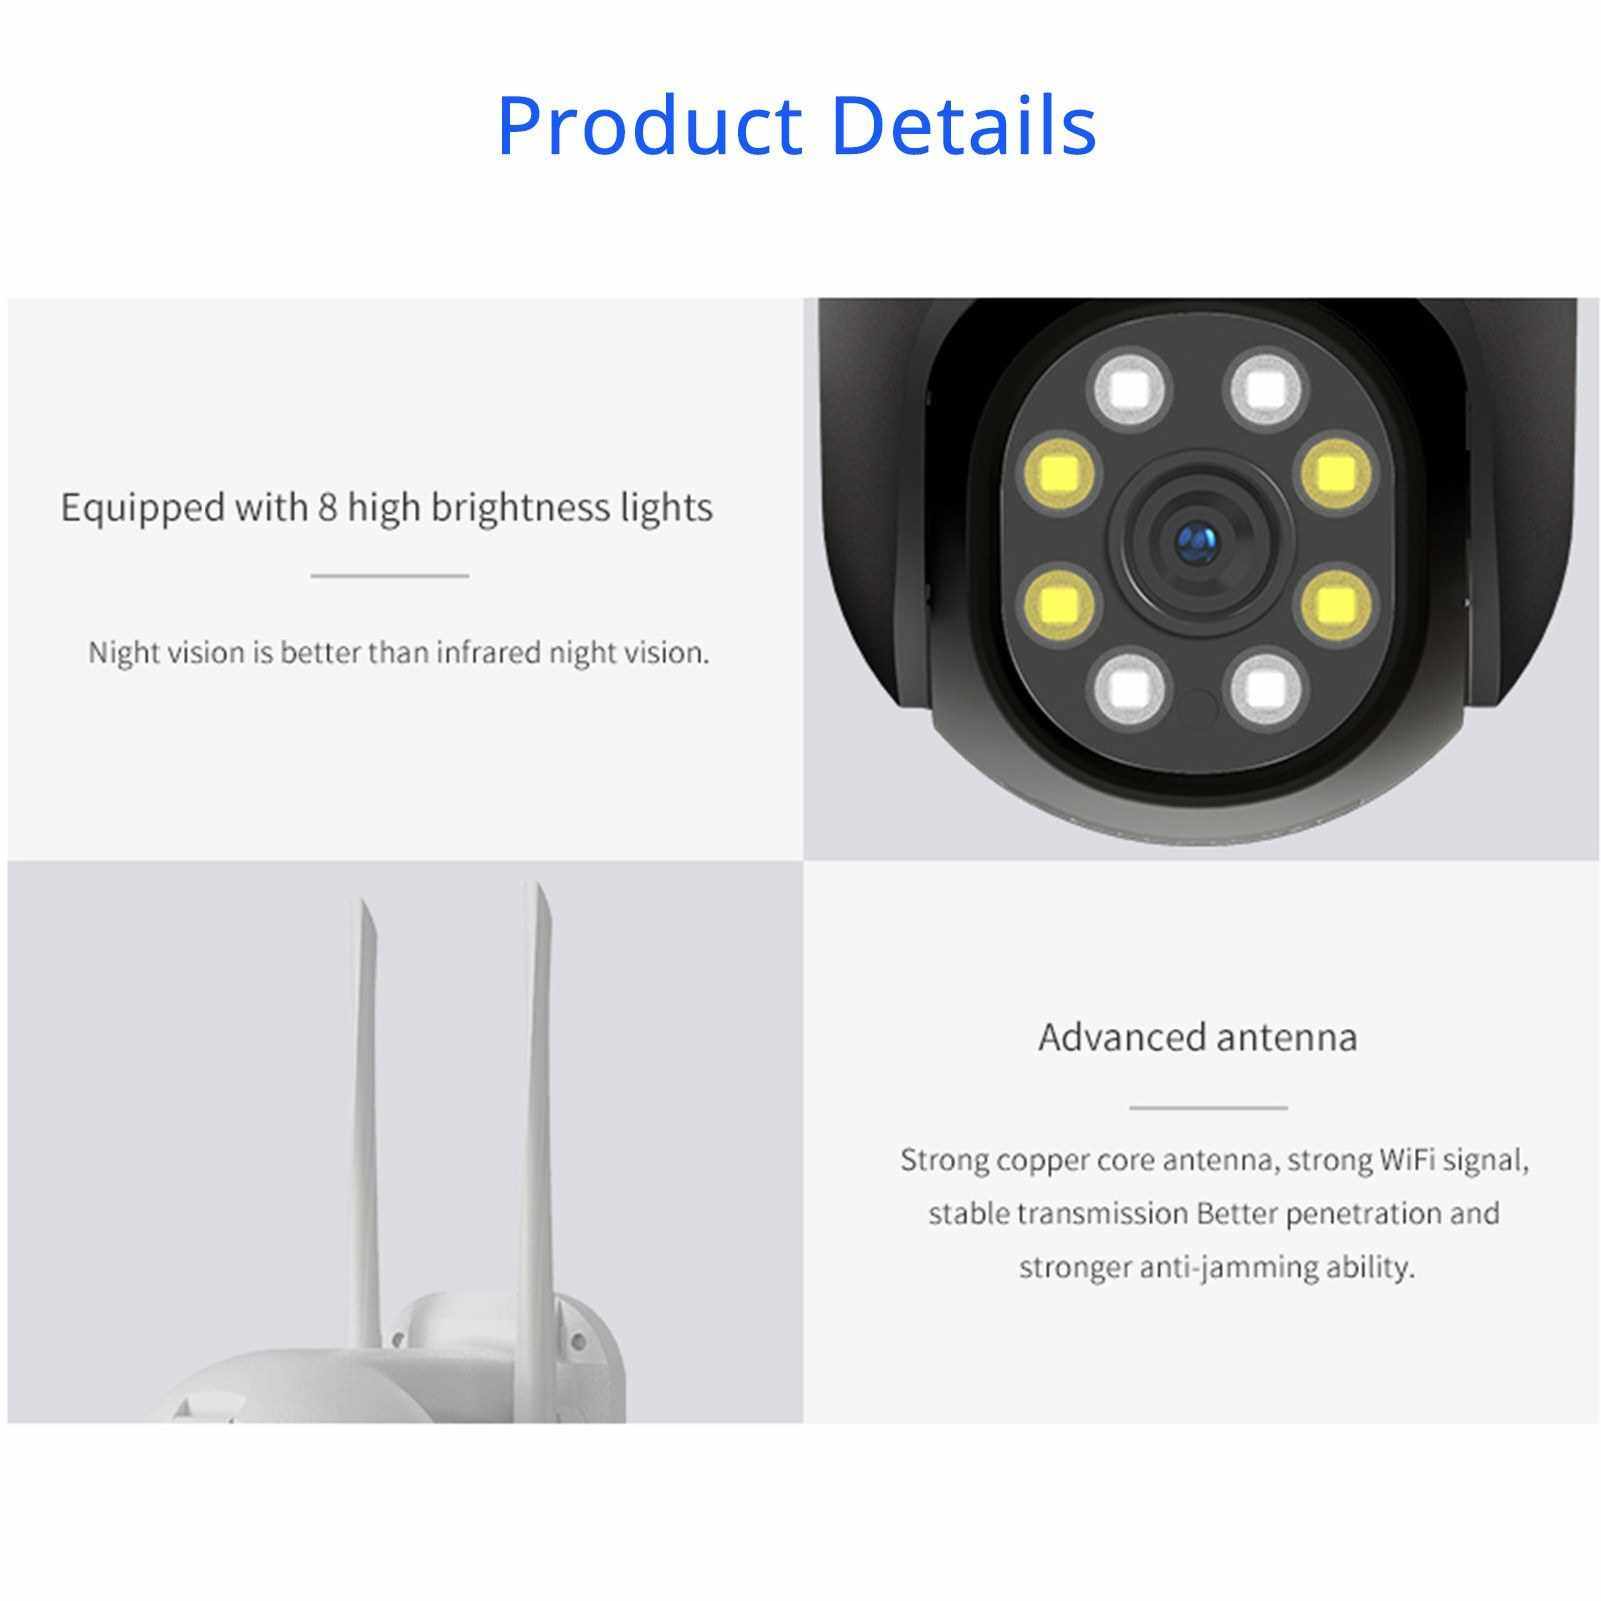 Outdoor Wireless WiFi Security Camera, 360 View Pan Tilt 720P WiFi Home Surveillance Camera with Color Night Vision, 2-Way Audio, Motion Detection, Ycc365plus App Remote Access, IP66 Waterproof (Black & White)